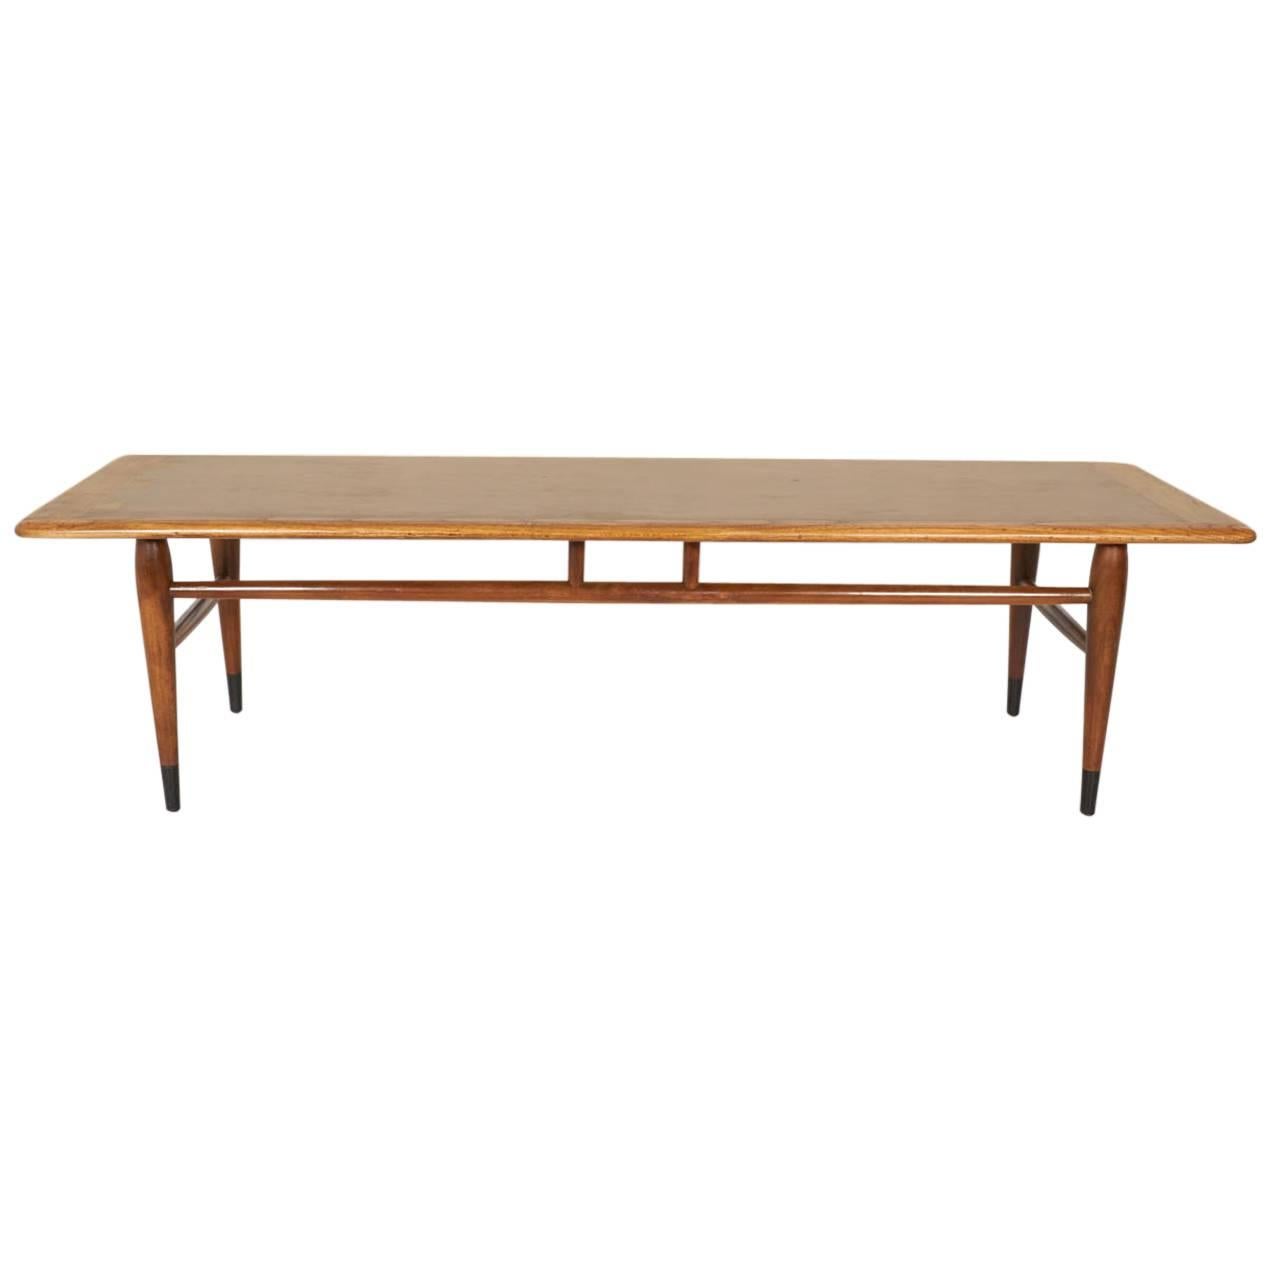 Modernist Walnut Coffee Table by Lane For Sale